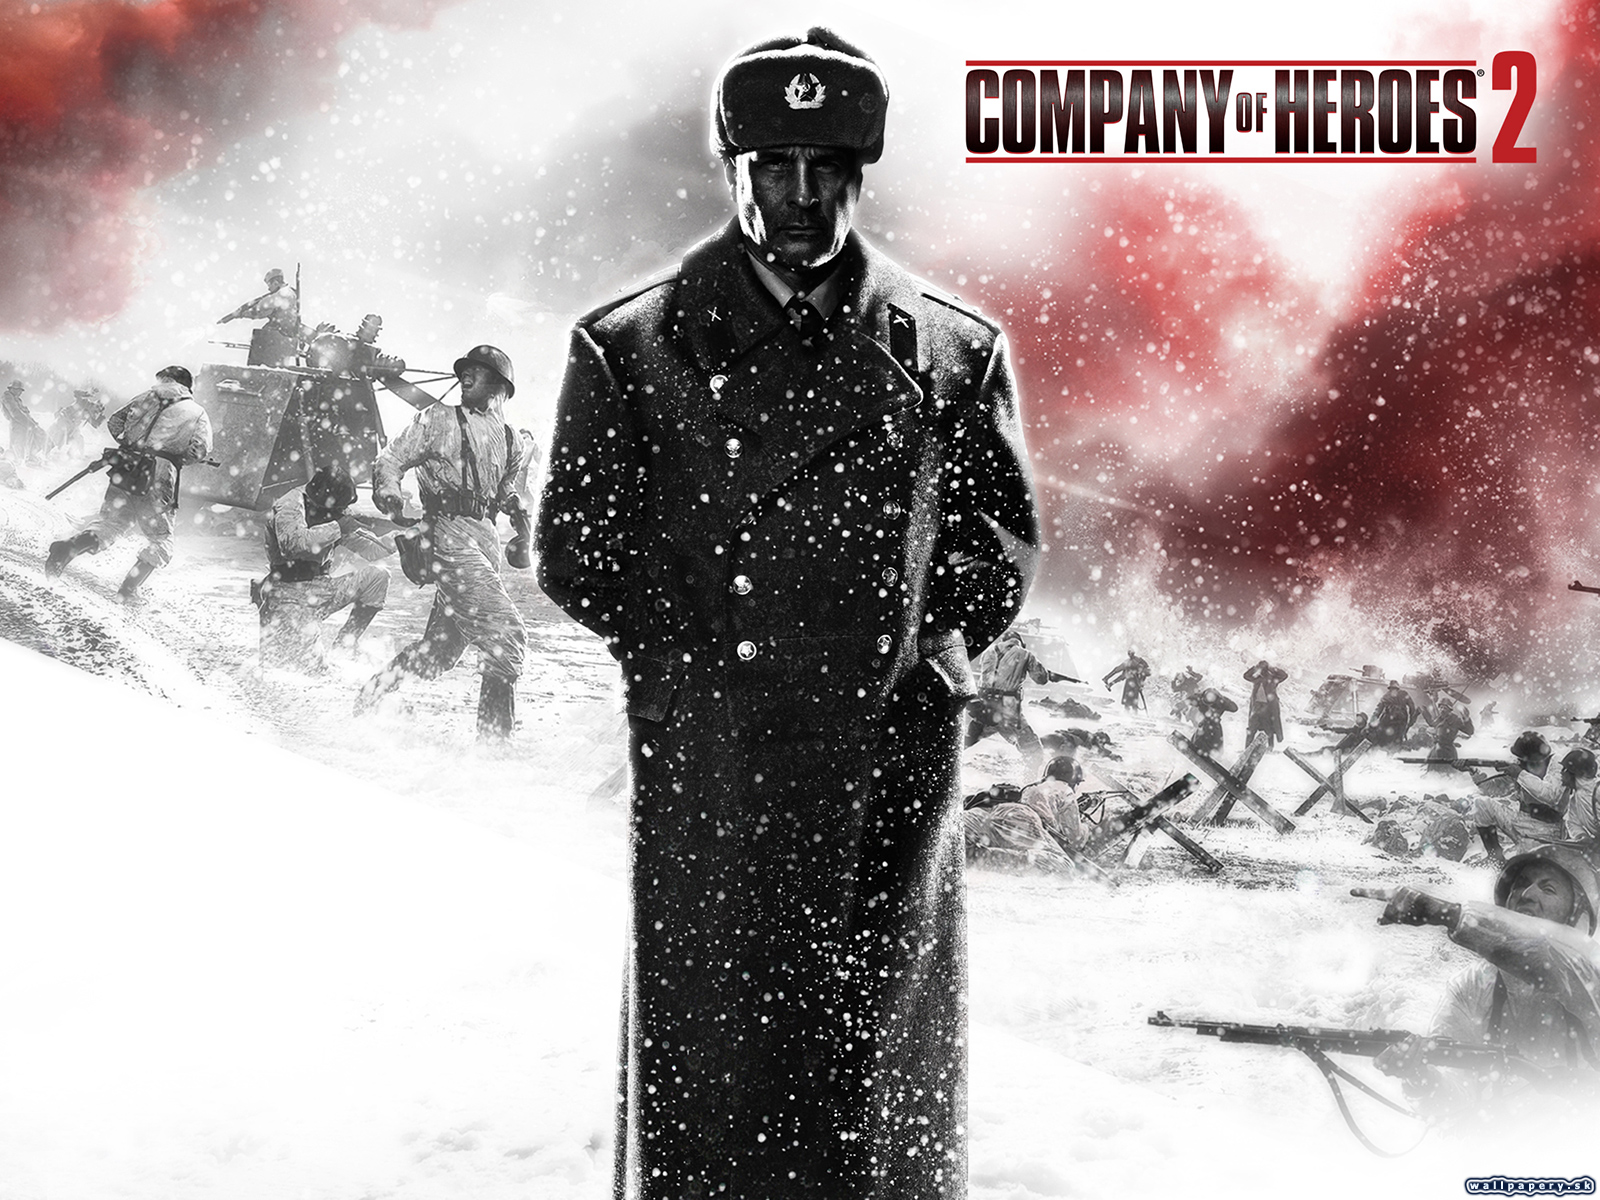 Company of Heroes 2 - wallpaper 1